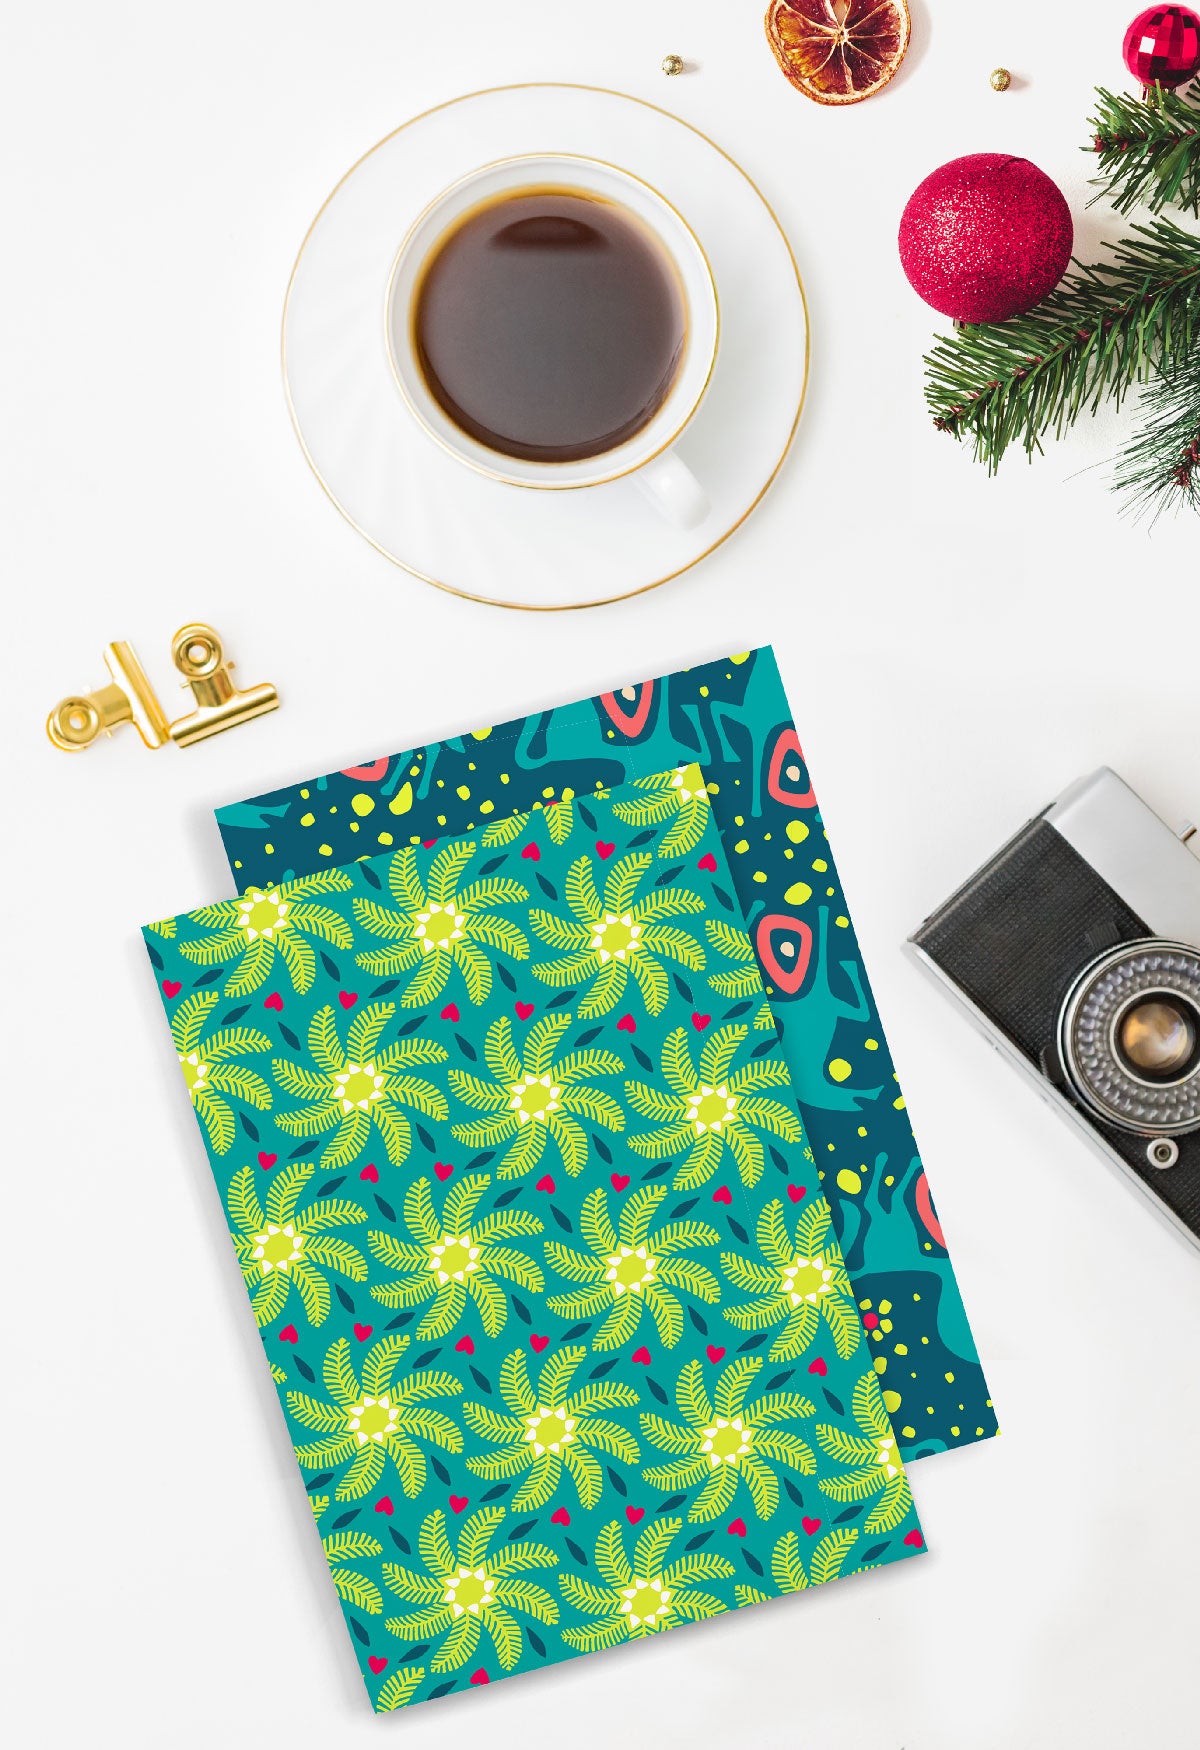 Limited edition notebooks Calypso